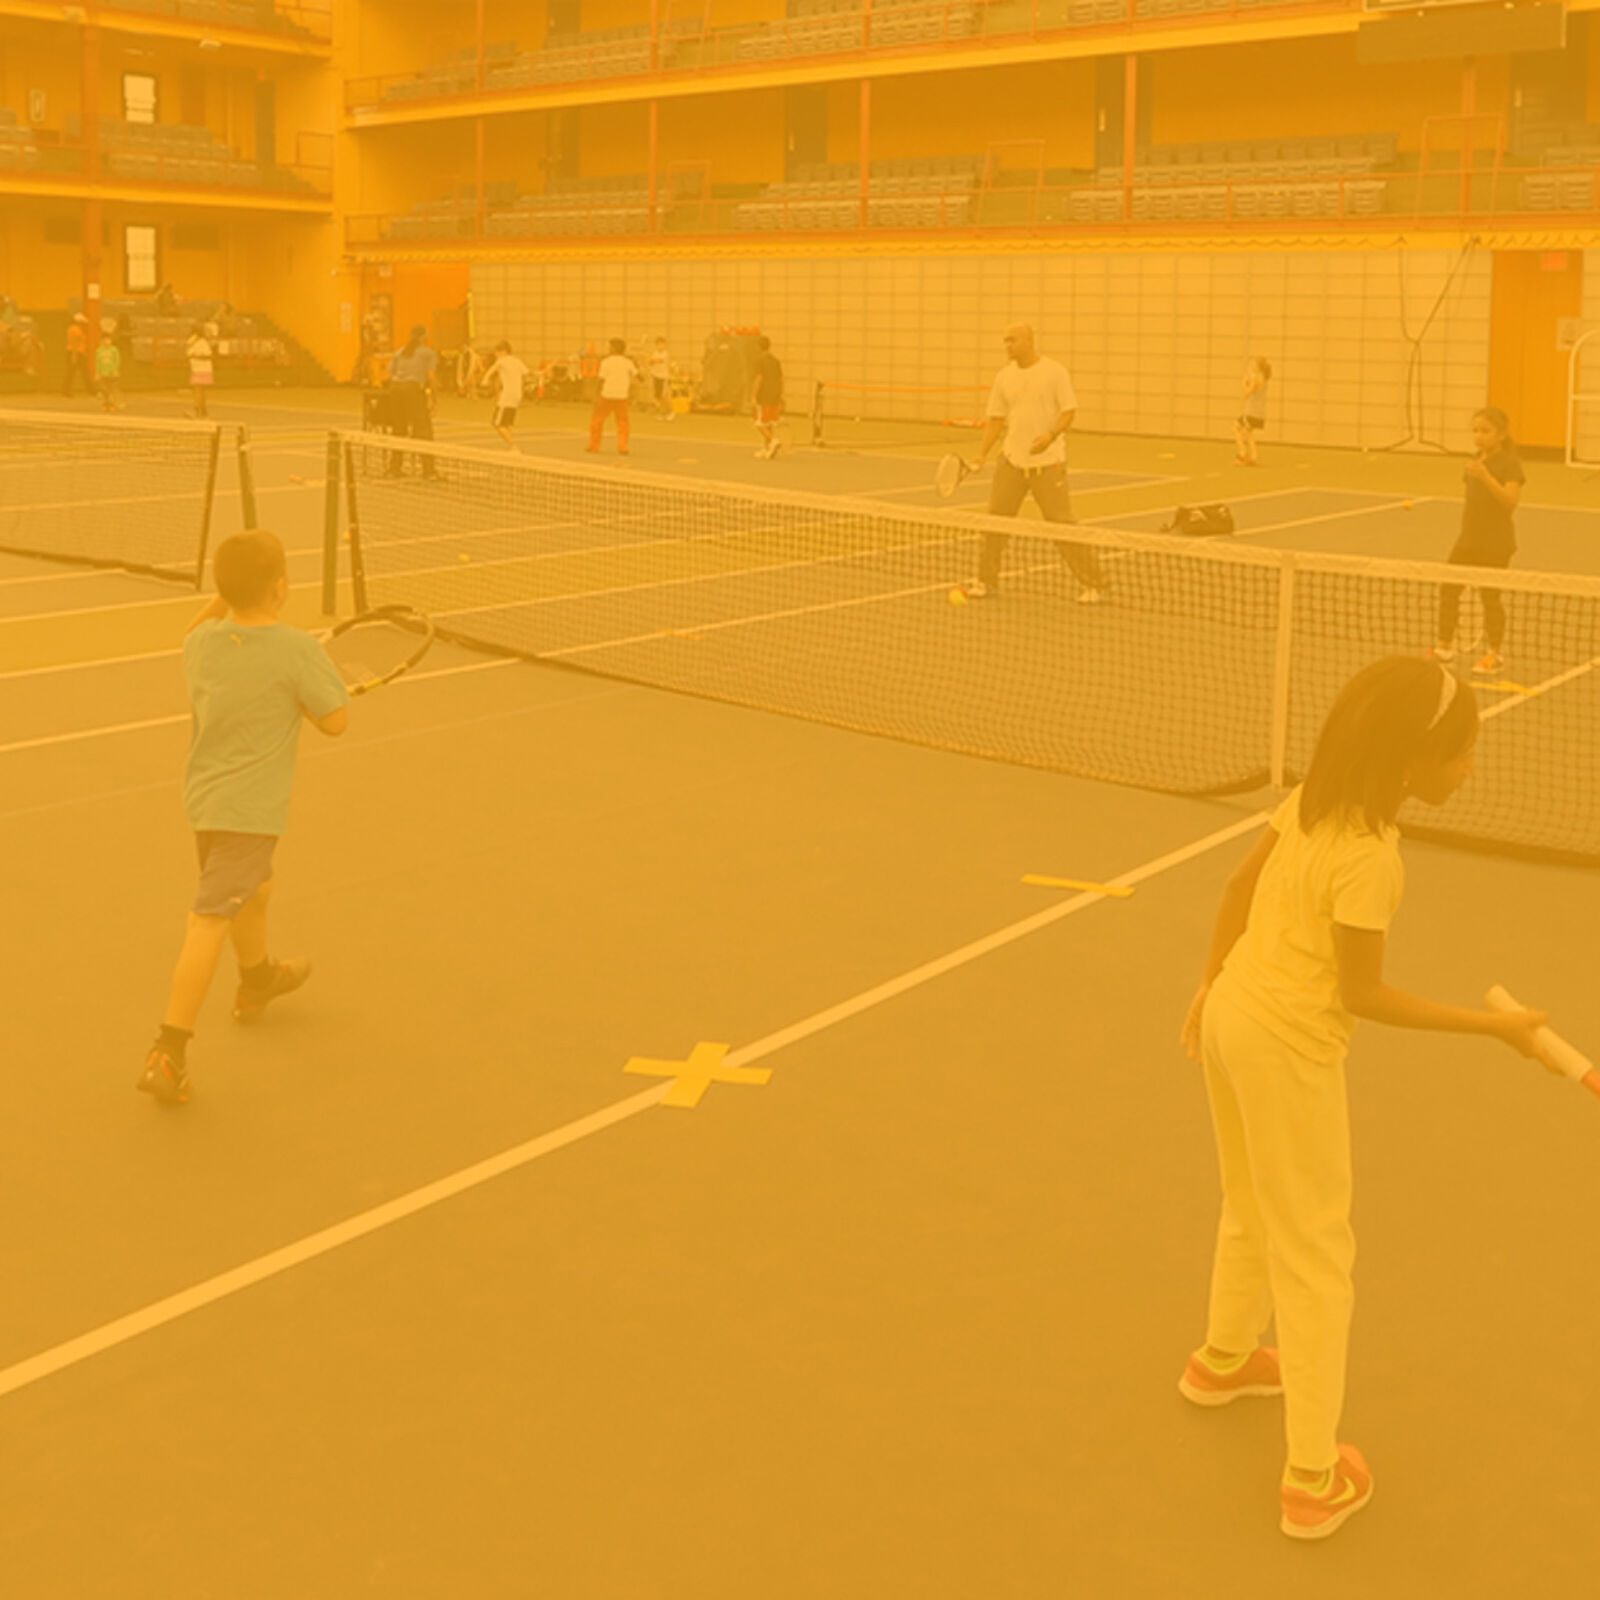 HJTEP brand and website image with youth practicing on tennis court